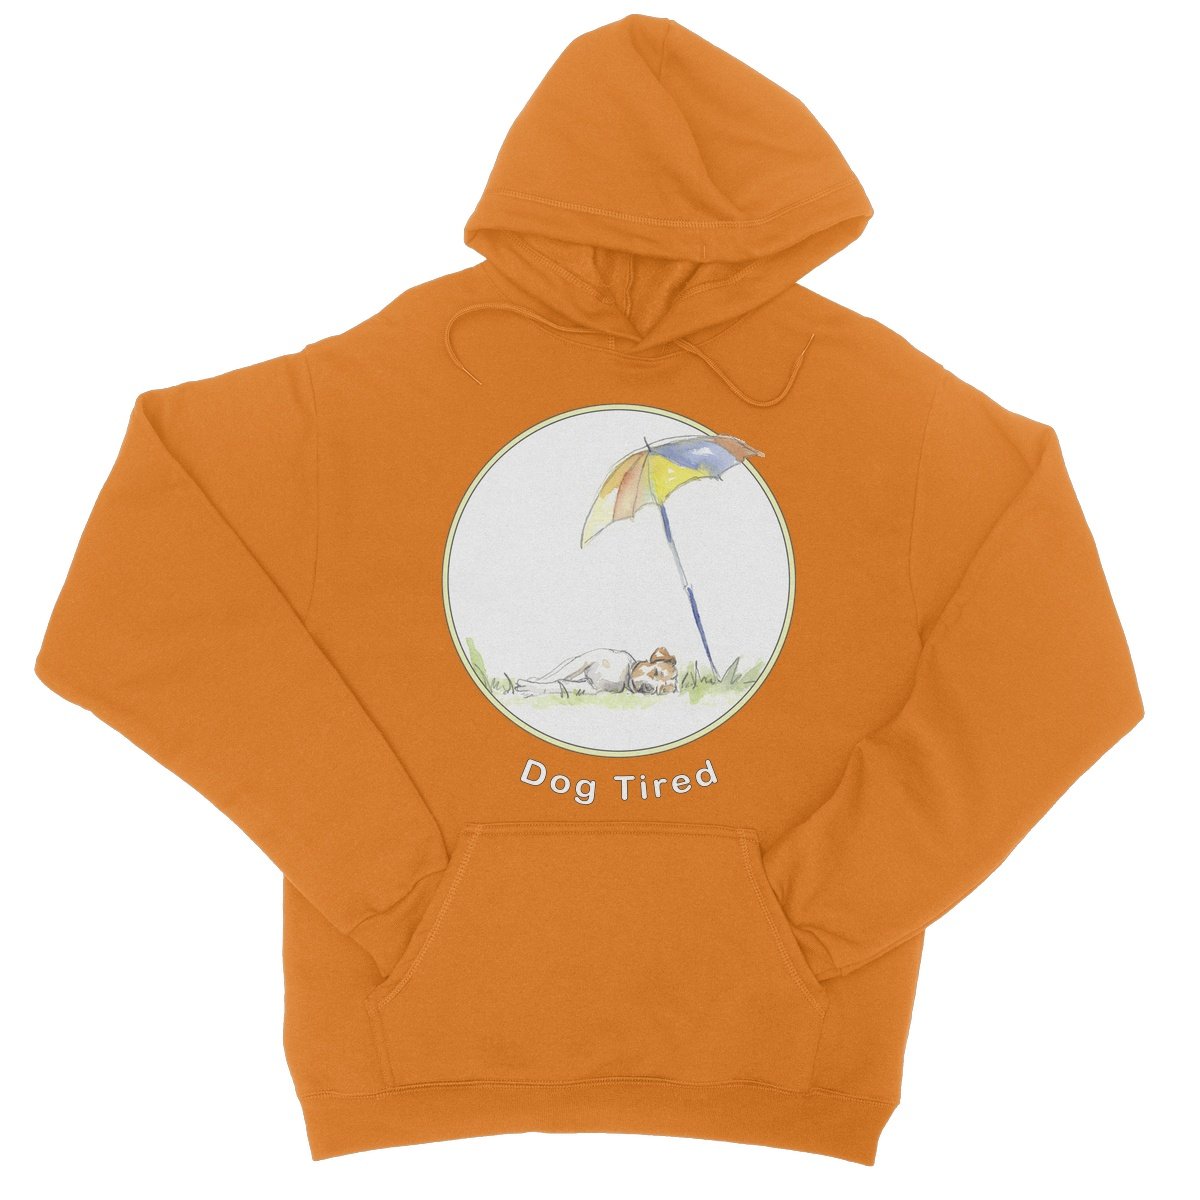 College Hoodie - 'Dog Tired'